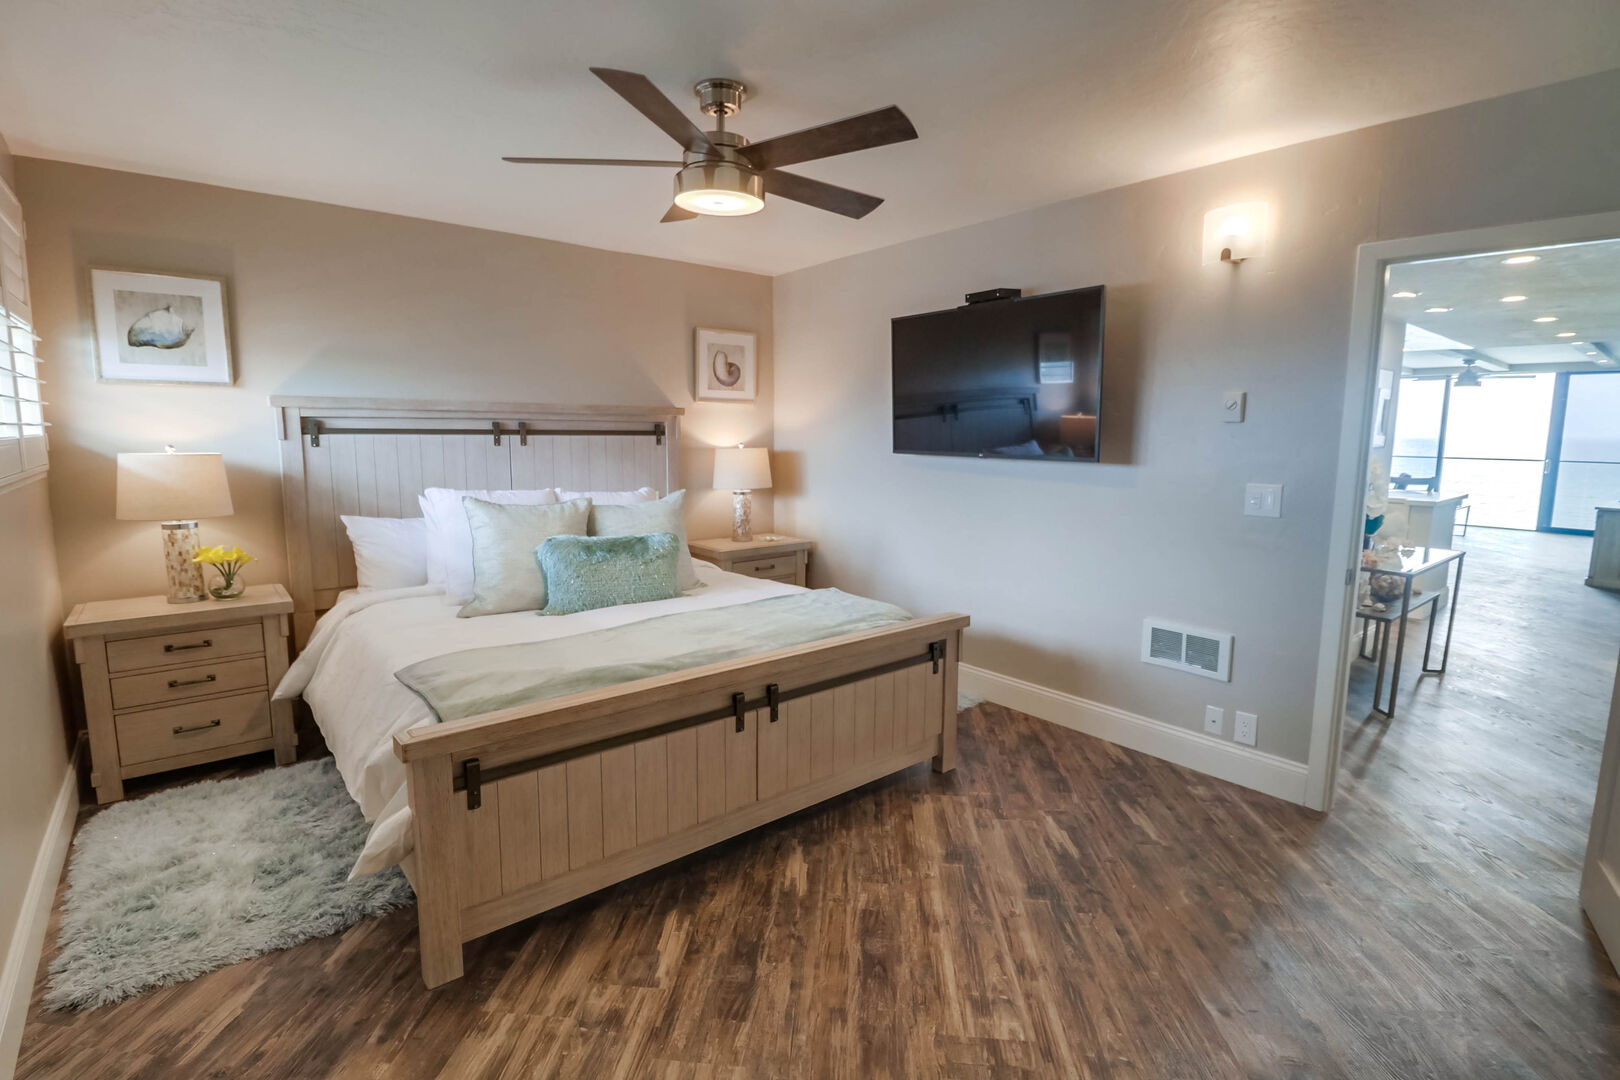 Master bedroom with dresser, 55 inch Smart TV, ceiling fan and king size bed